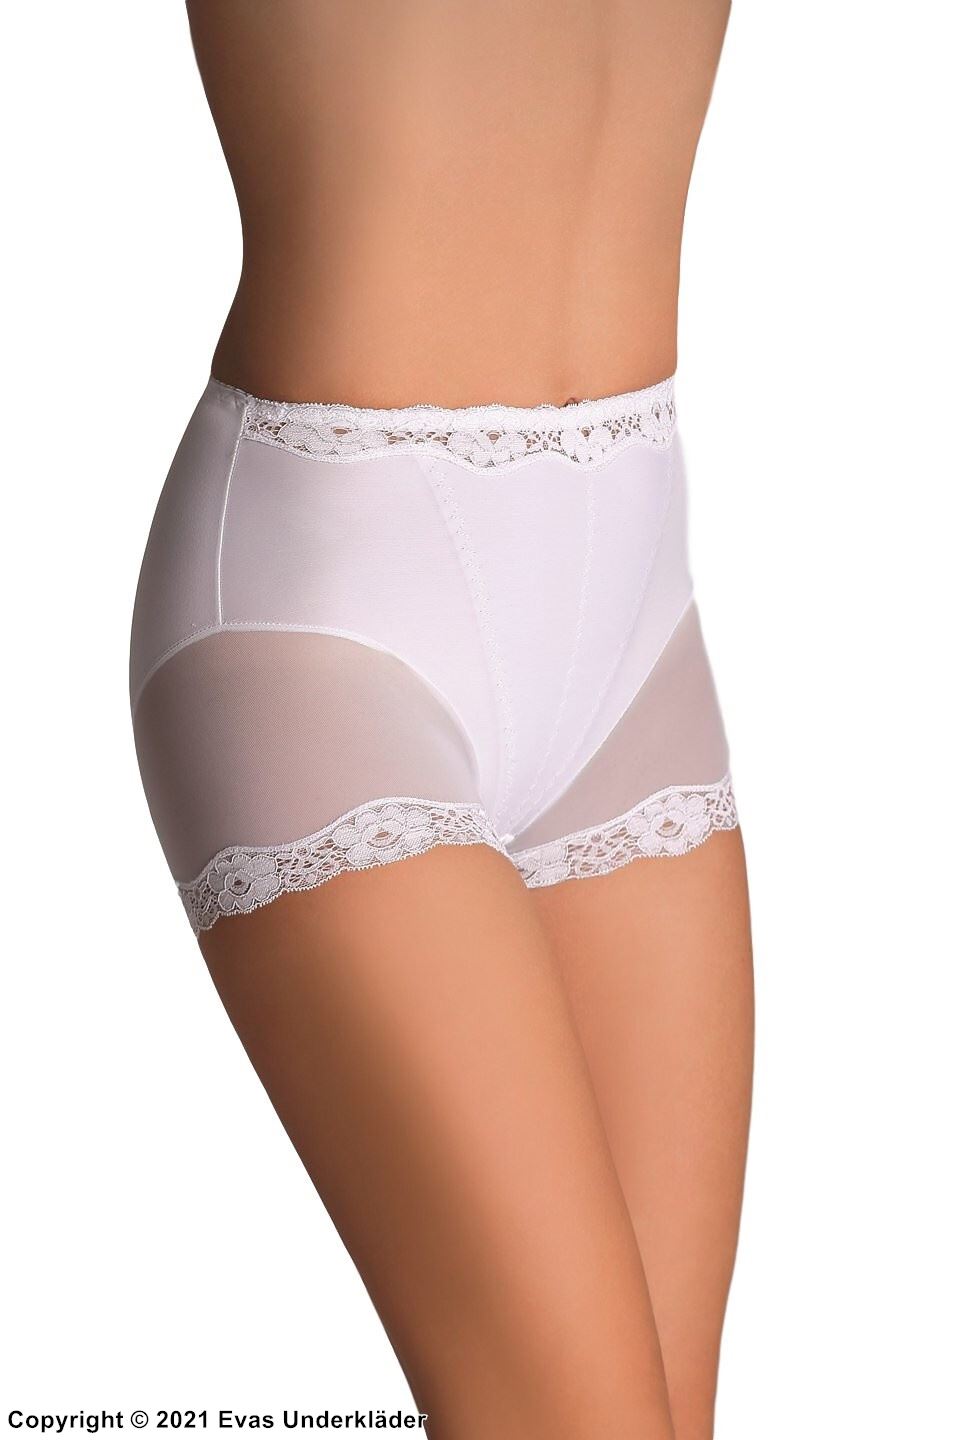 Boxer shorts, lace trim, sheer inlays, belly control